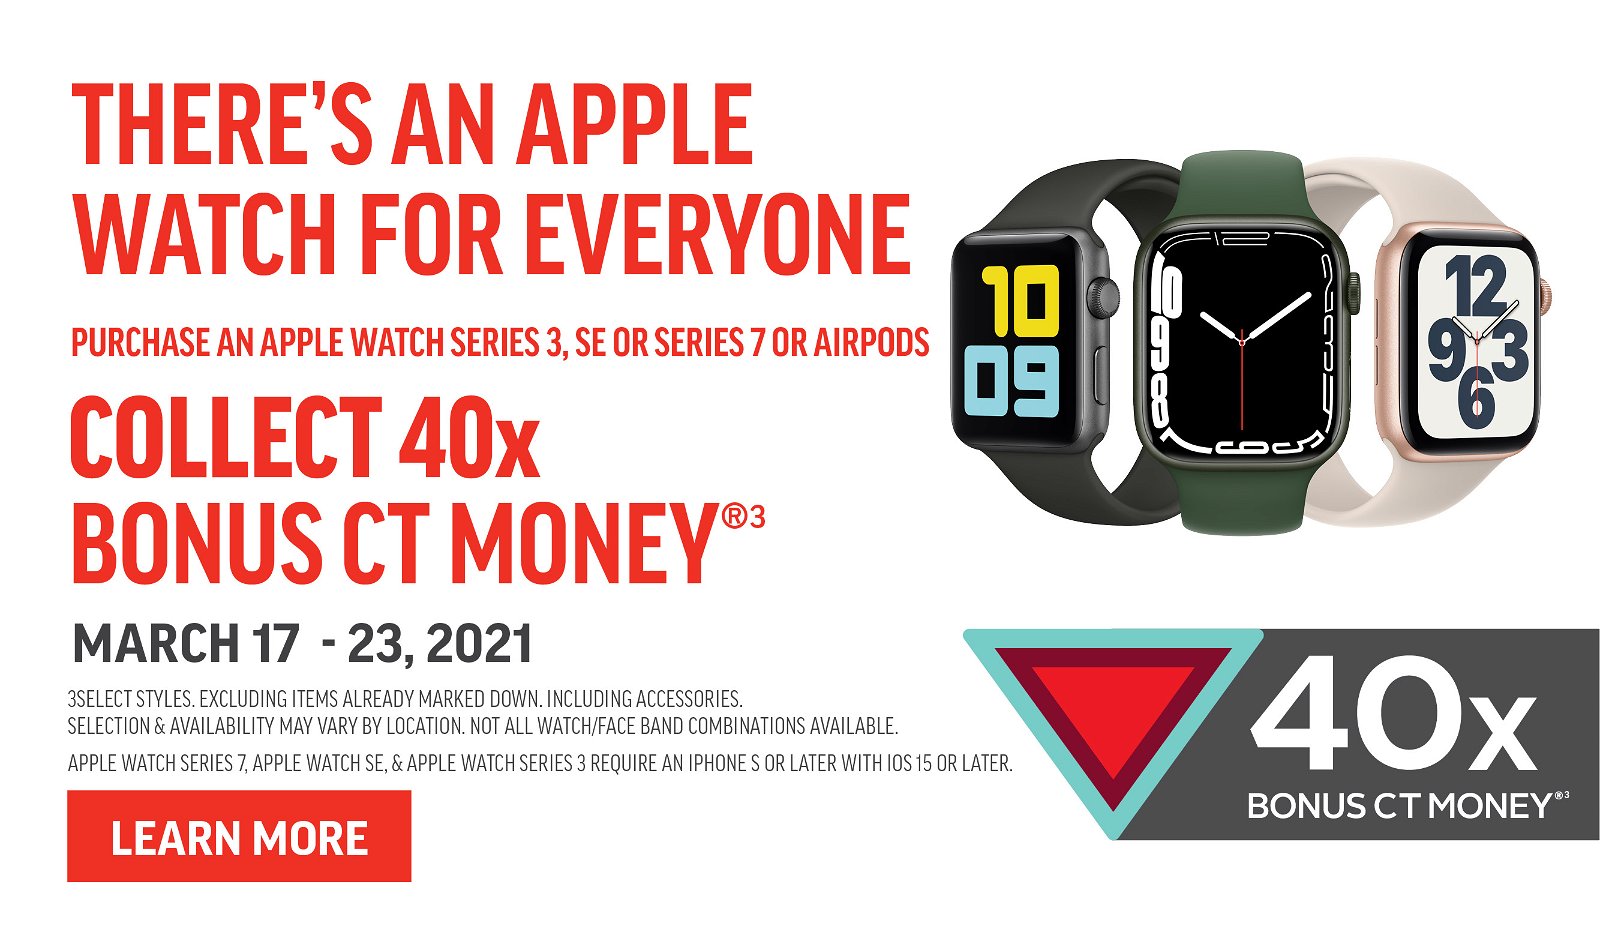 THERES AN APPLE WATCH FOR EVERYONE